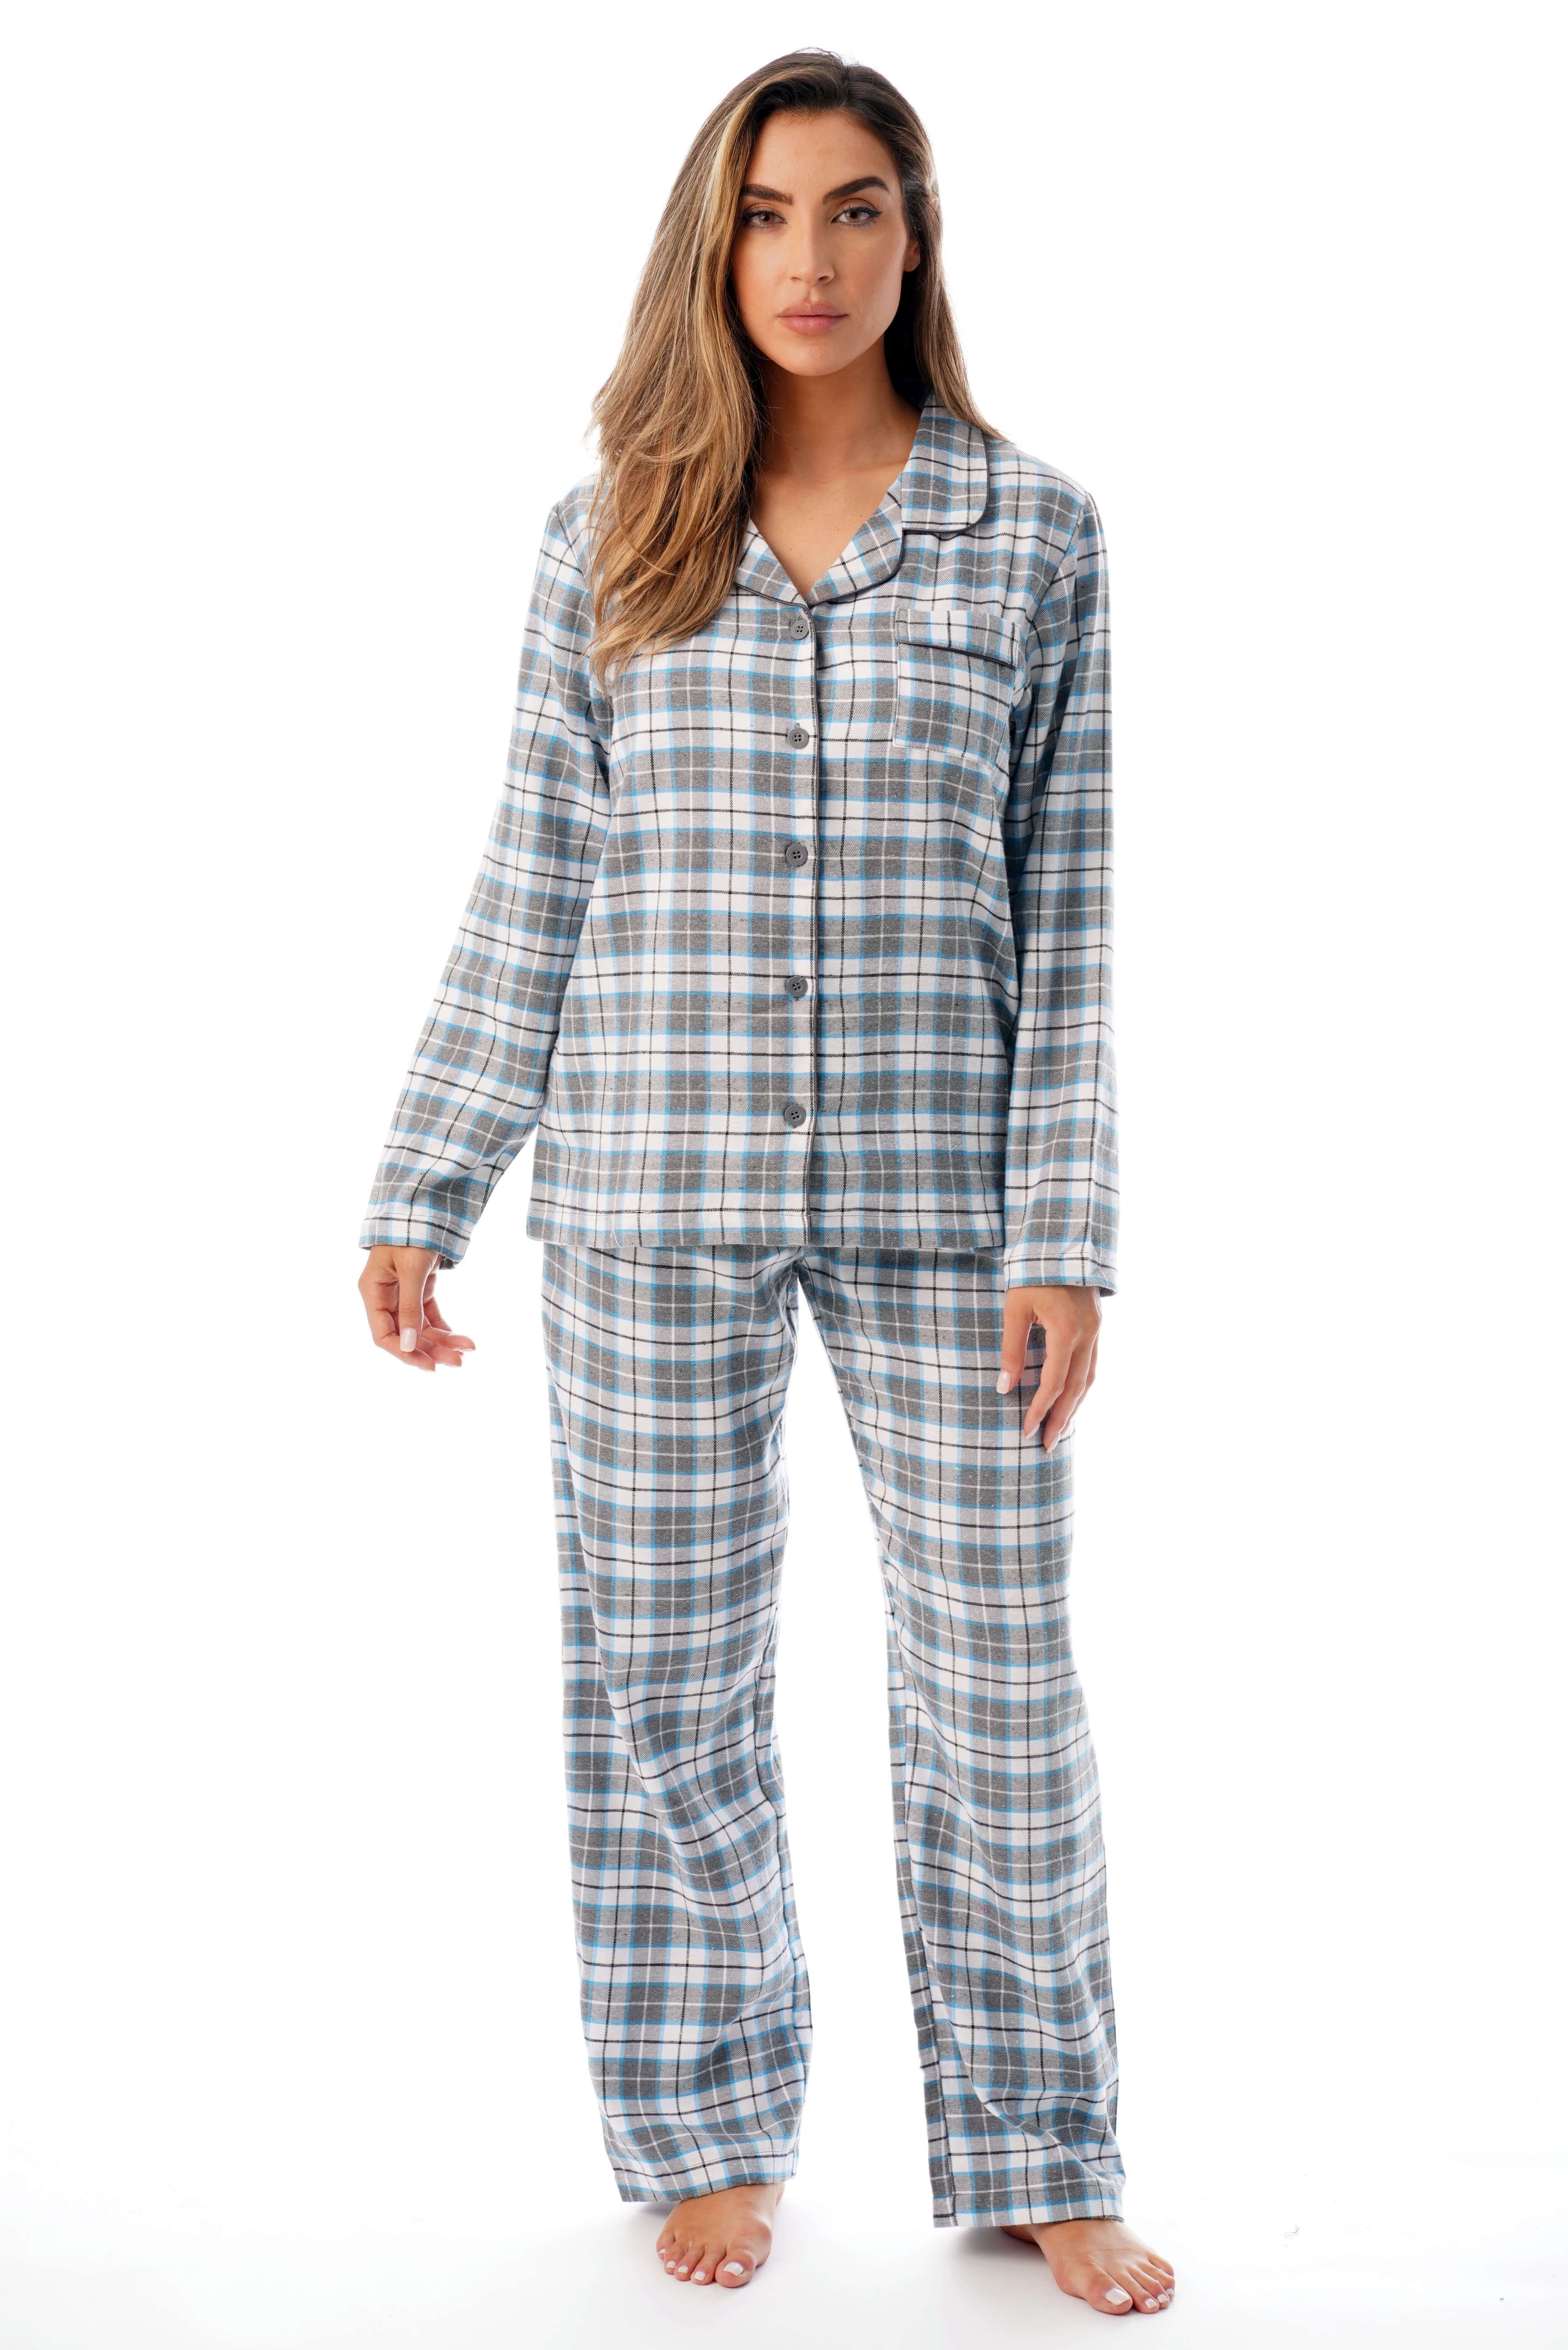 Just Love Long Sleeve Flannel Pajama Sets for Women 6760-10195-RED-3X ...